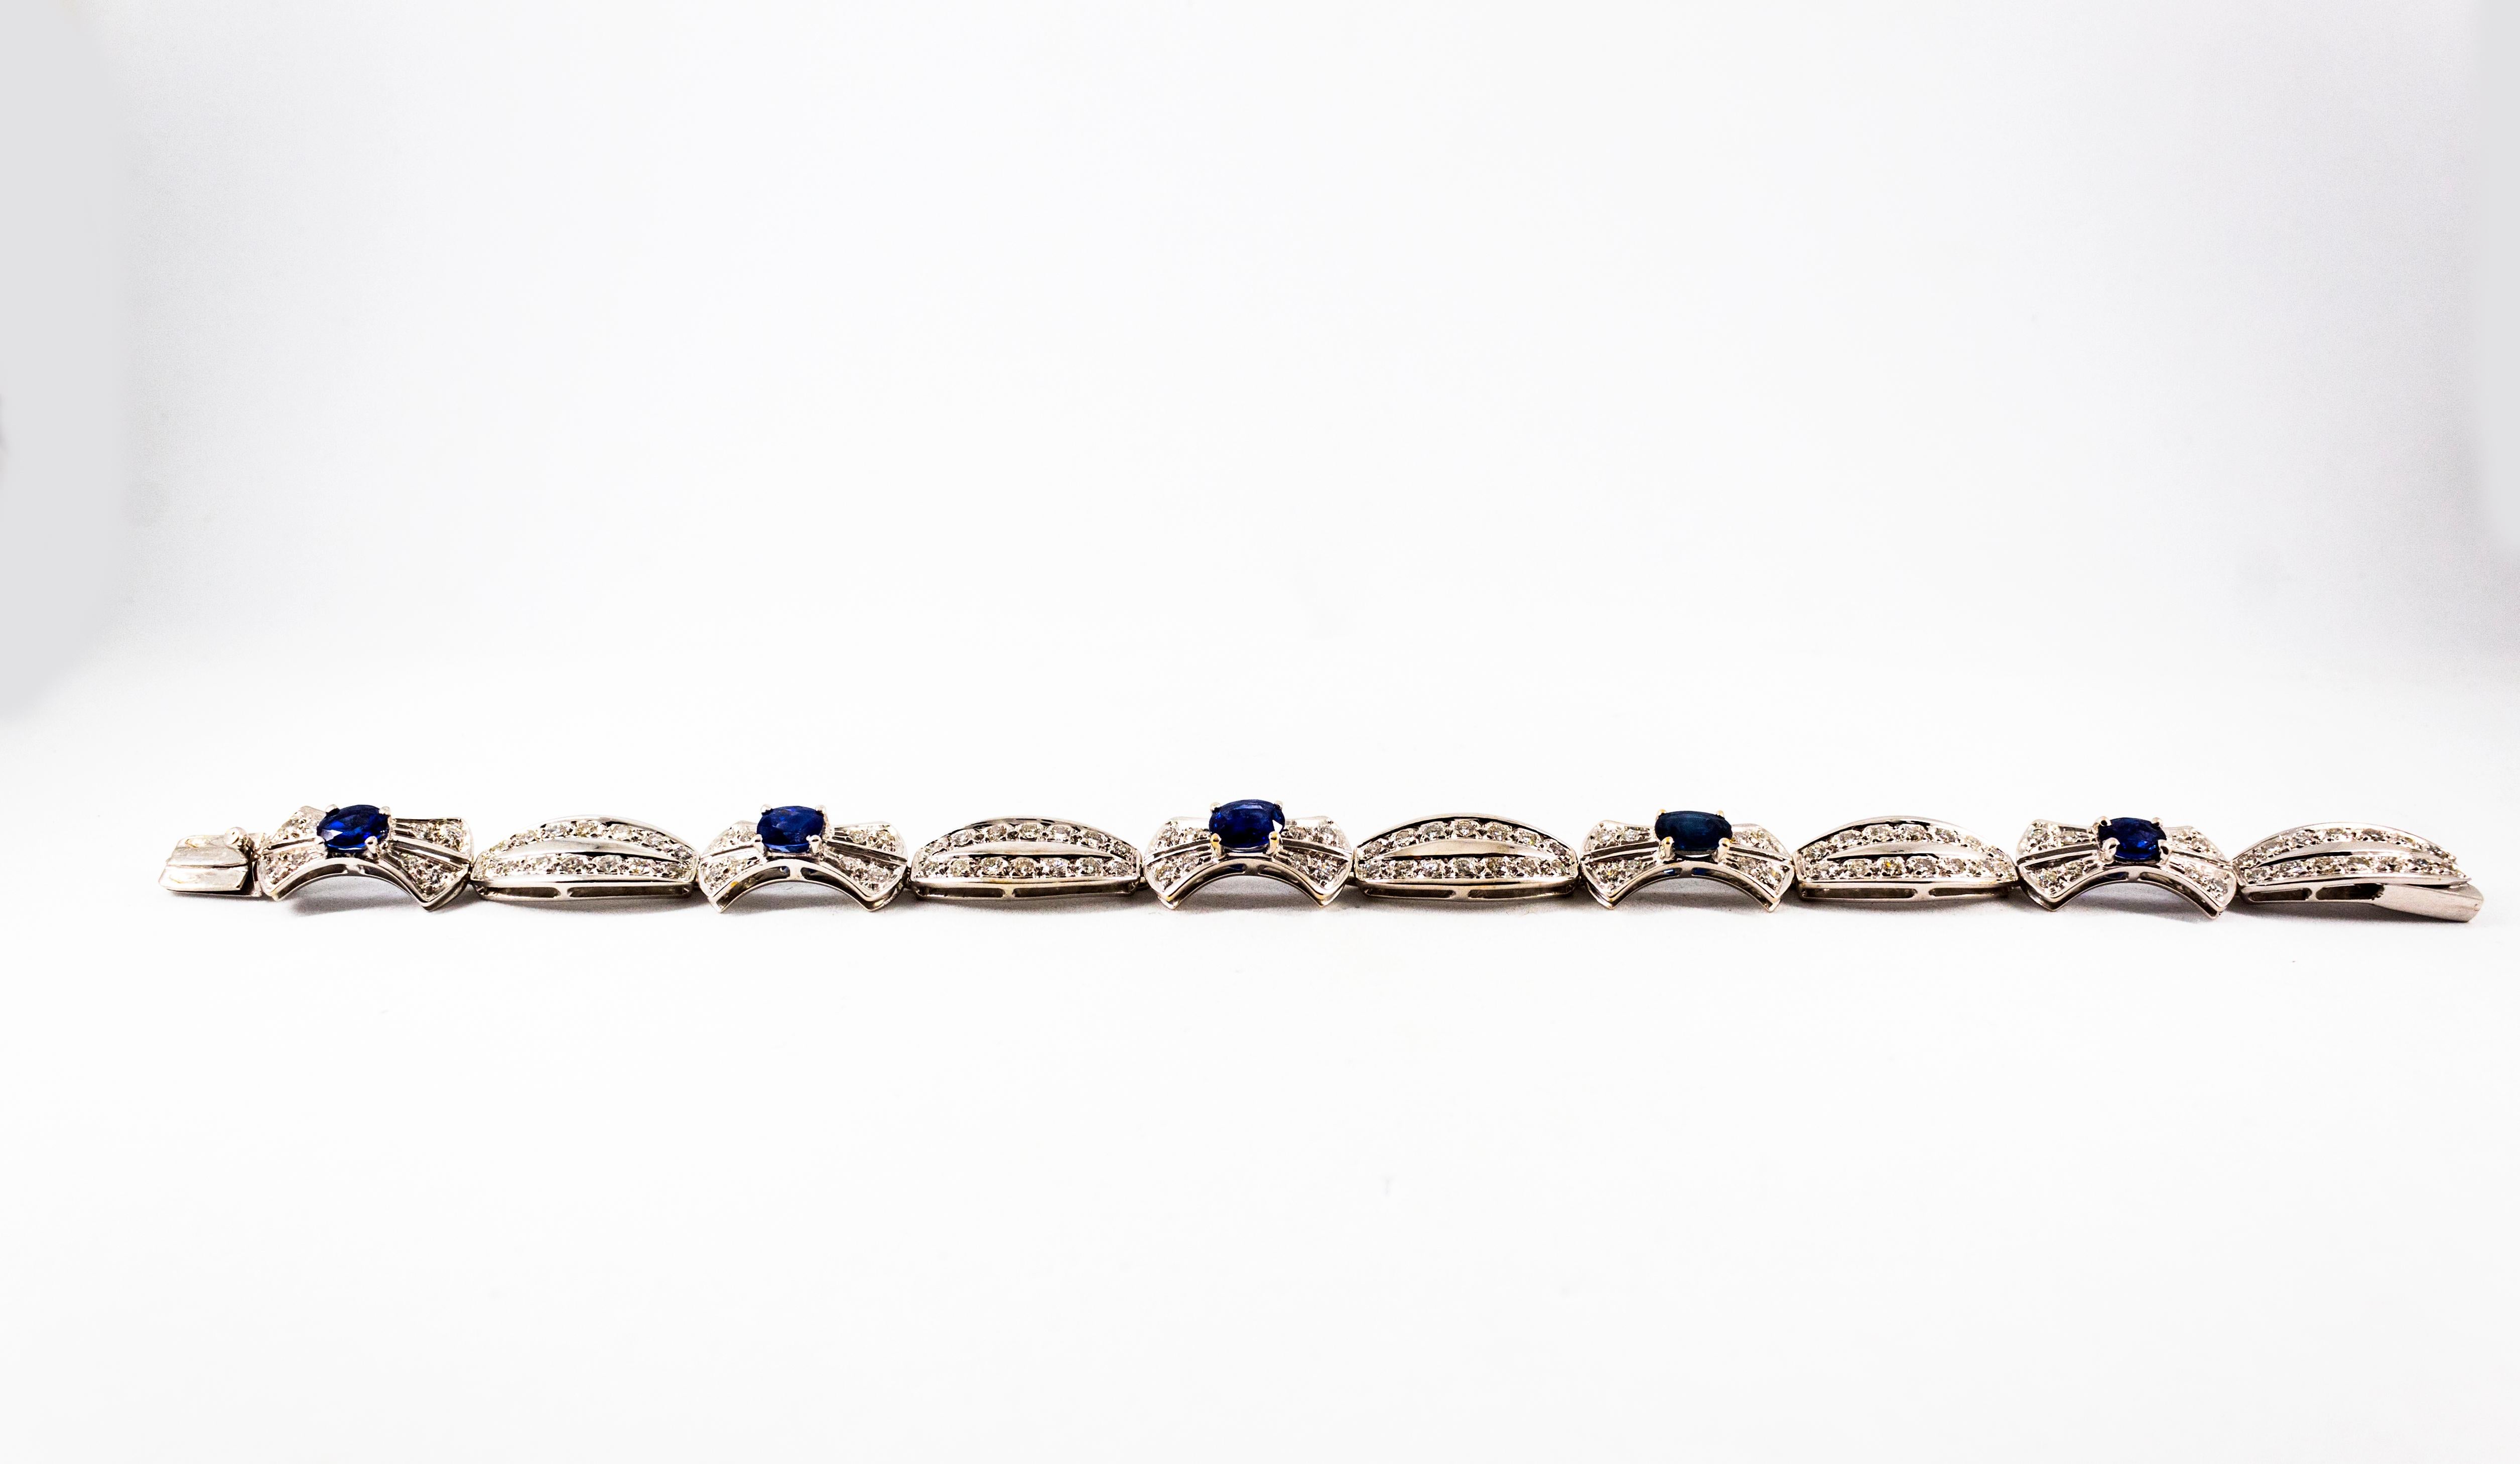 This Bracelet is made of 18K White Gold.
This Bracelet has 2.00 Carats of White Diamonds.
This Bracelet has 3.70 Carats of Blue Sapphires.
We're a workshop so every piece is handmade, customizable and resizable.